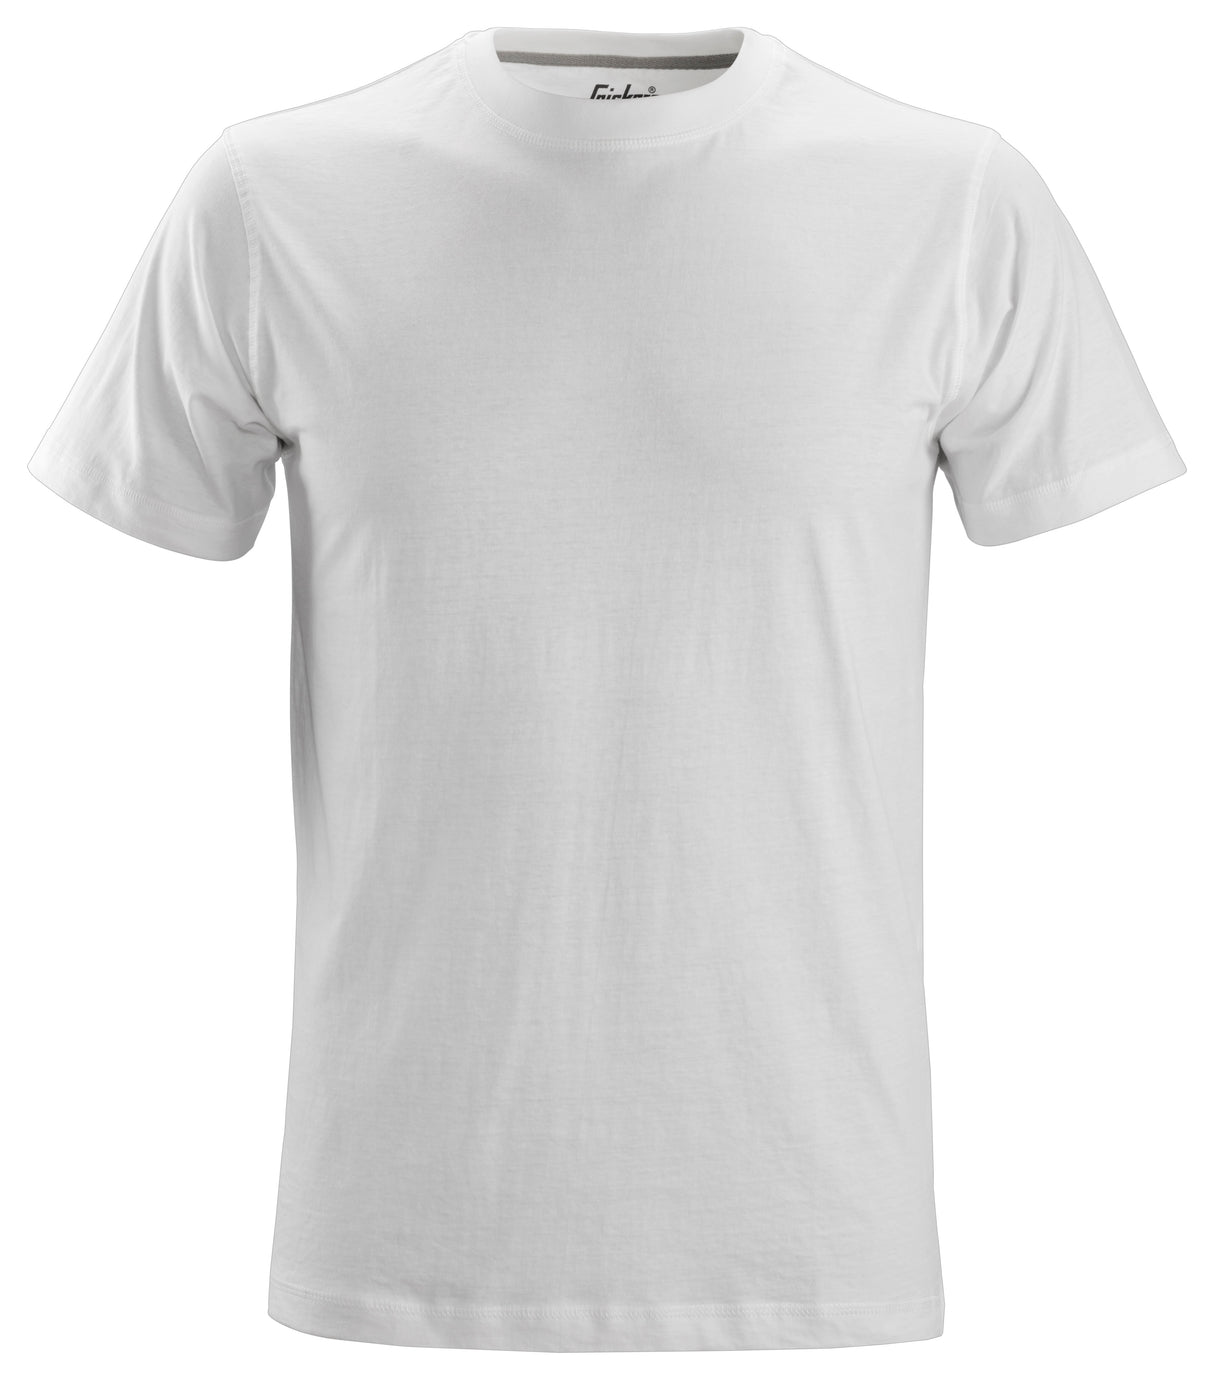 Snickers Classic T-Shirt White (2502)